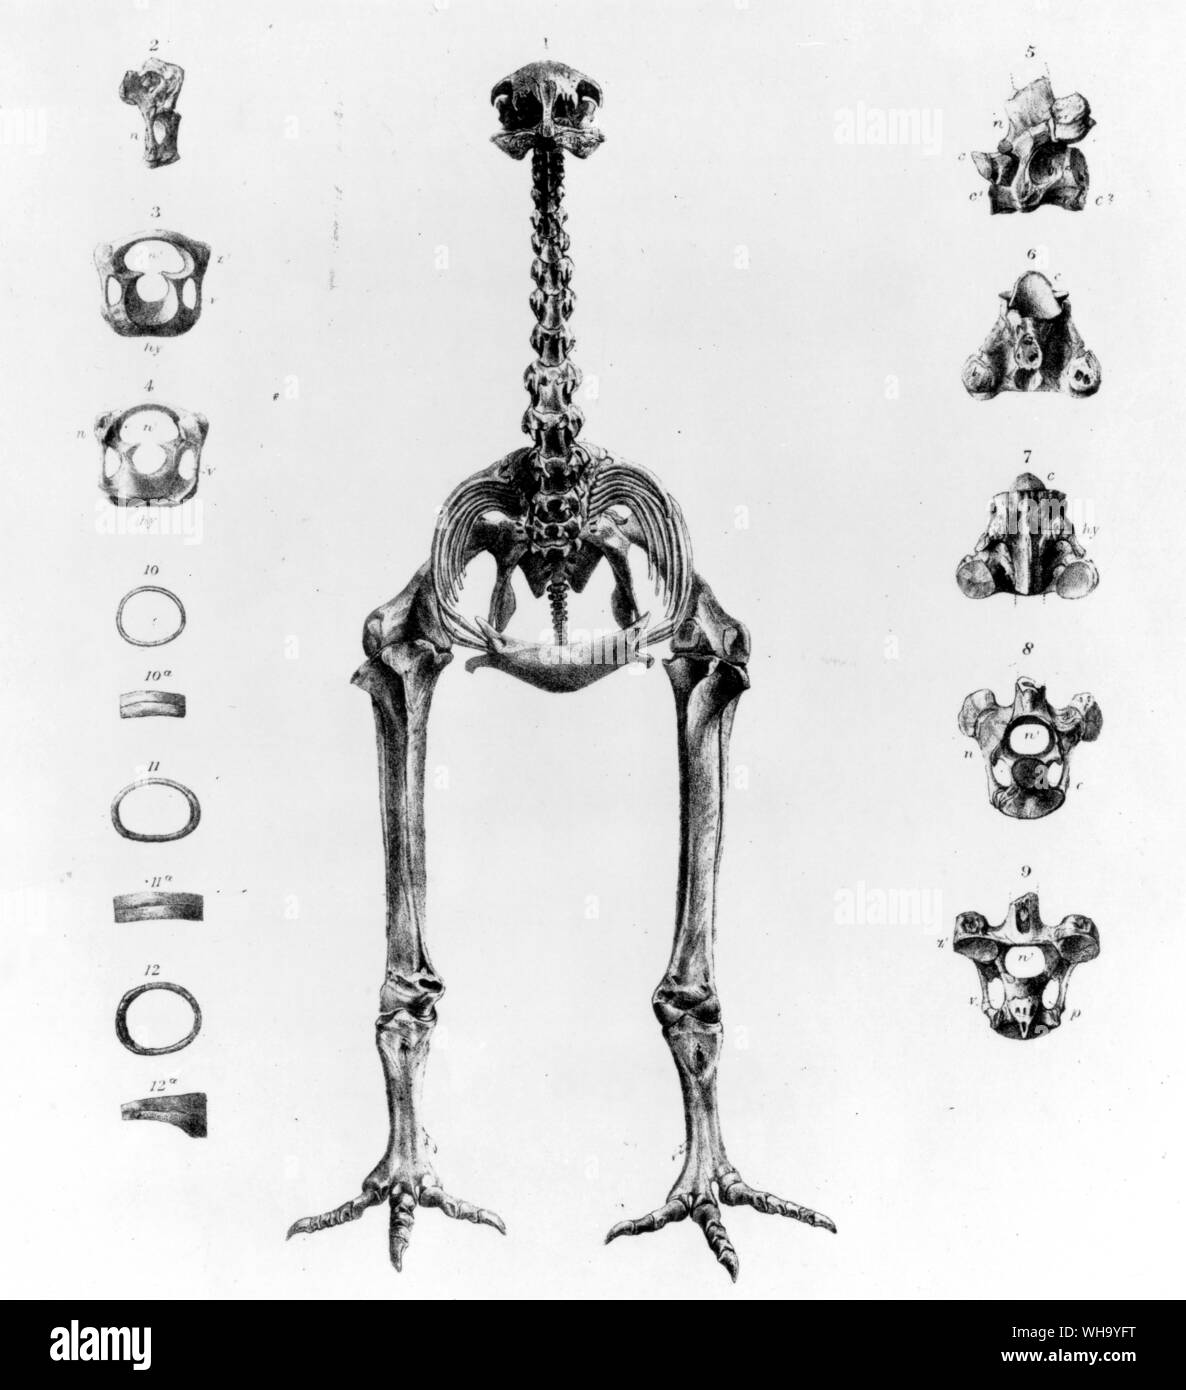 Skeleton of a moa.  Lithograph by James Erxleben from the Transactions of the Zoological Society of London, Vol. 11 (1883) Stock Photo